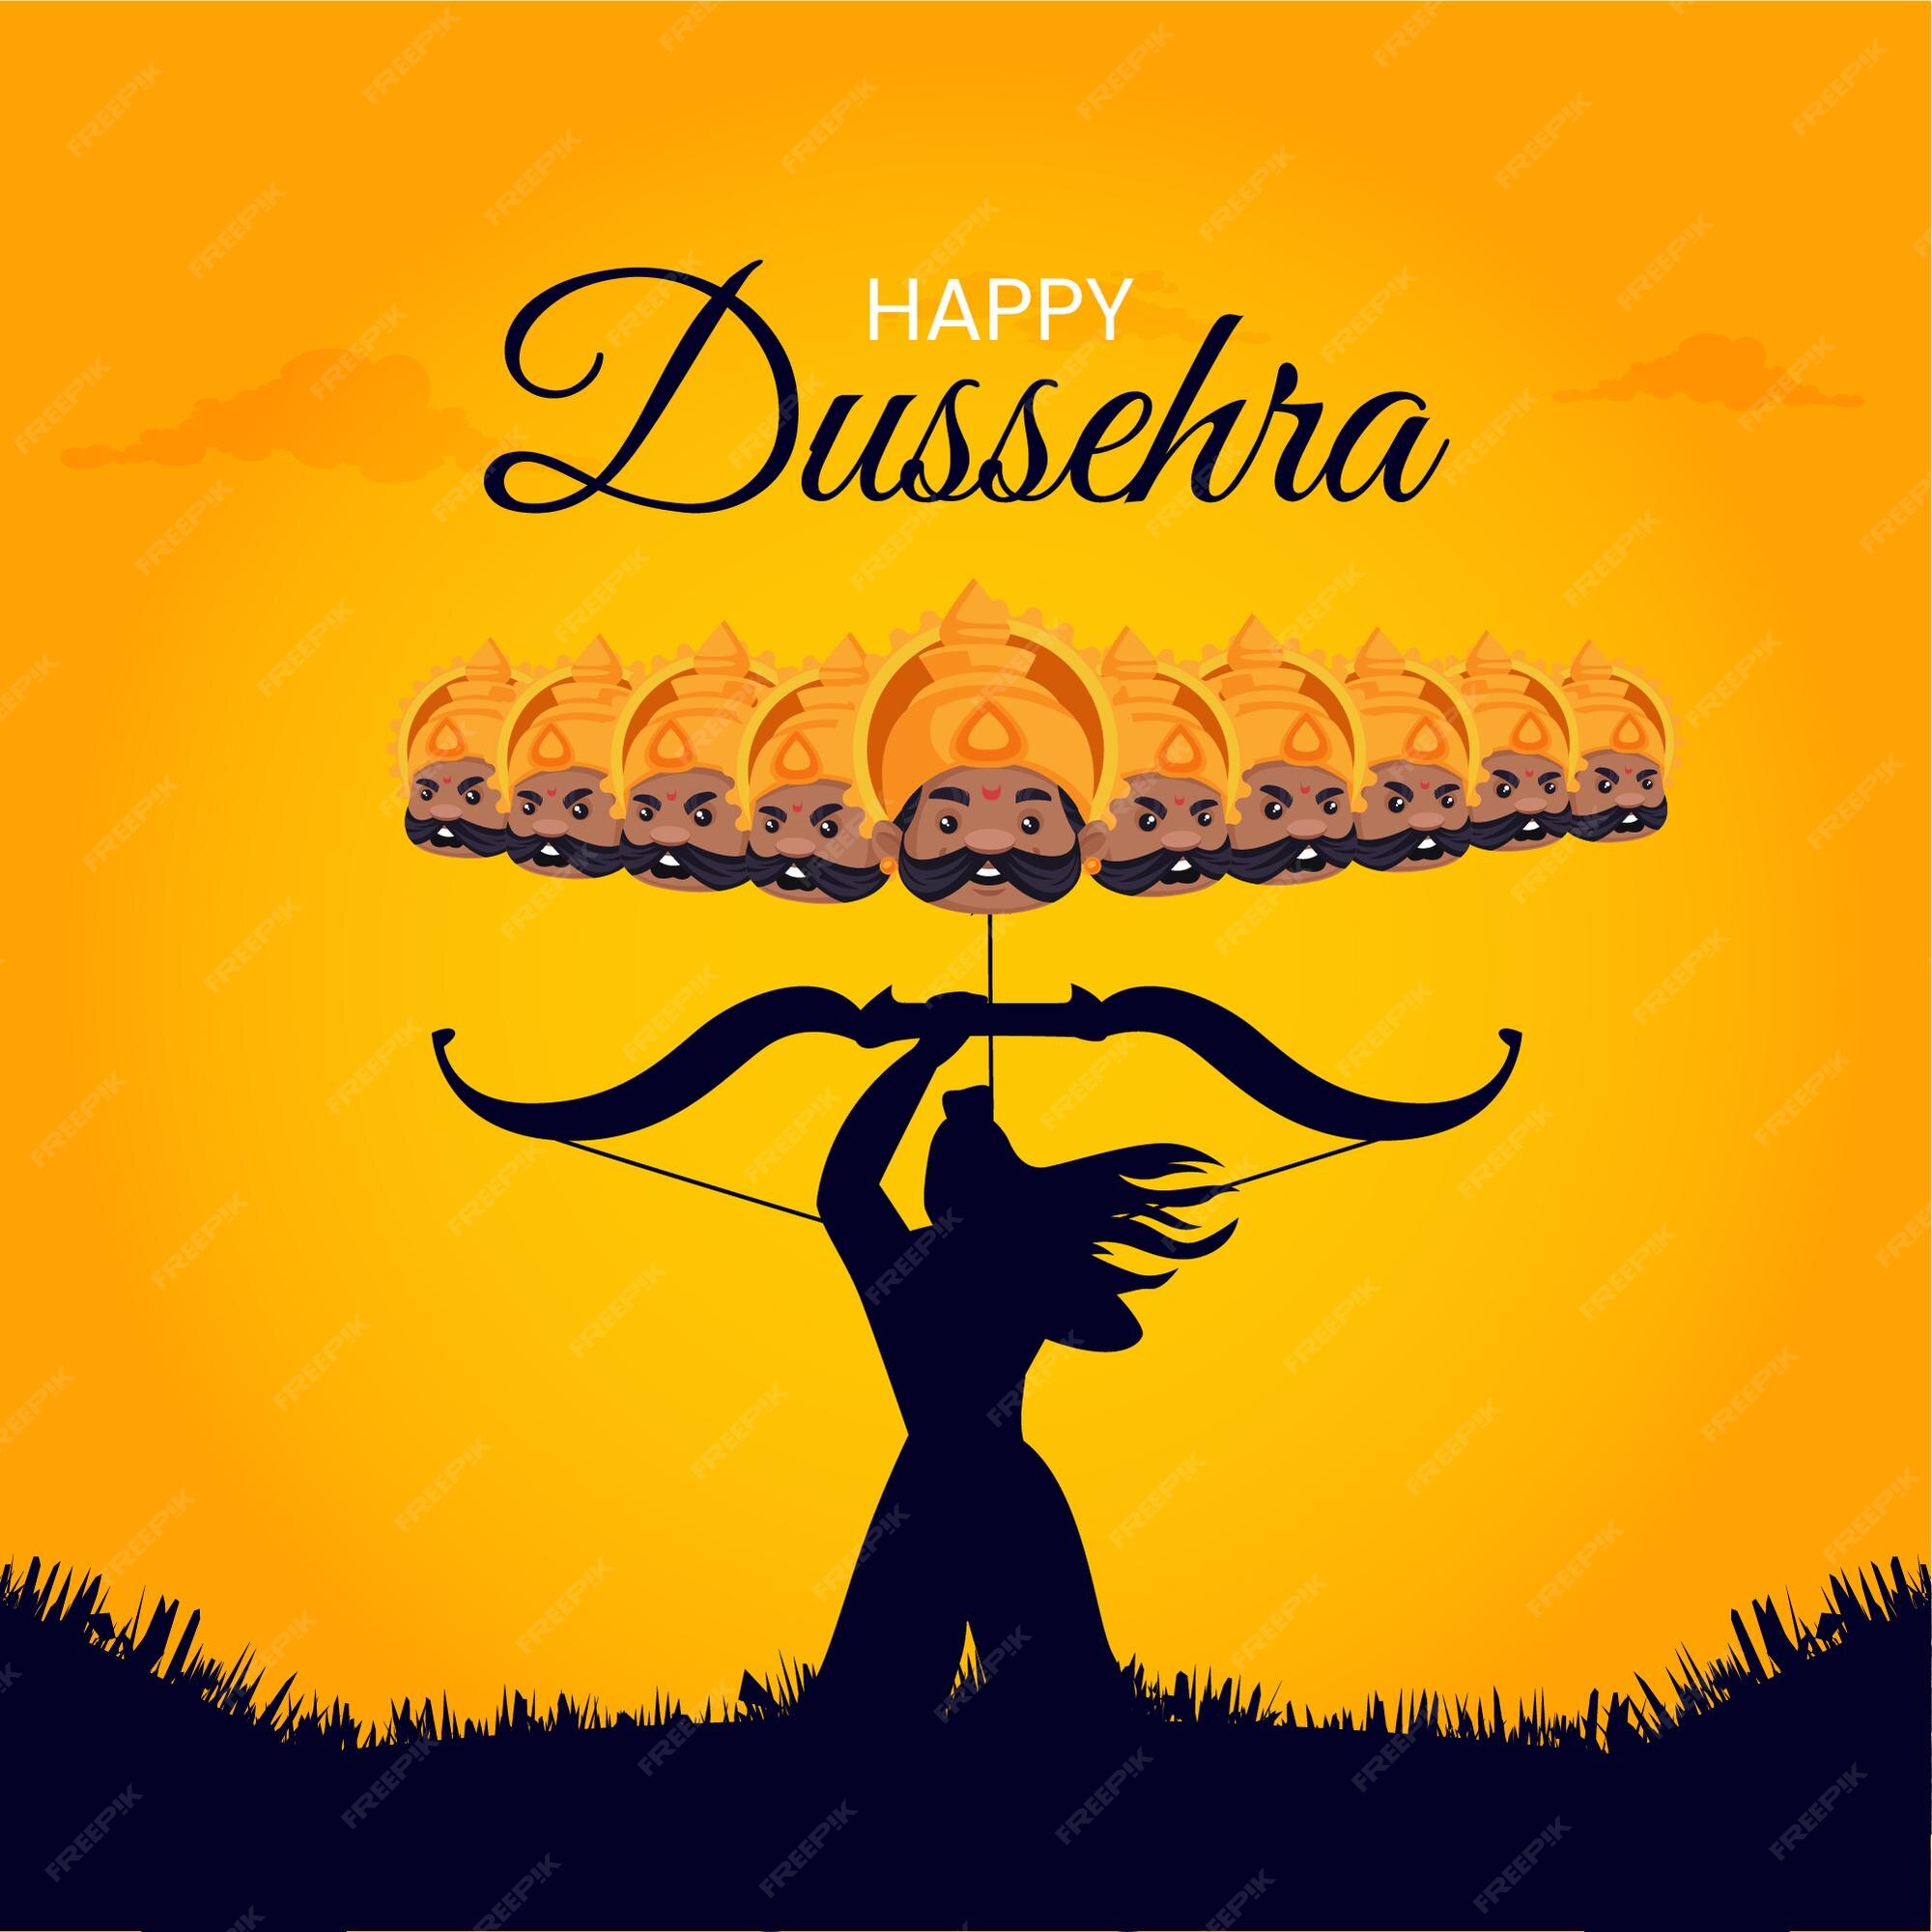 Premium Vector | Wish you a very happy dussehra indian festival banner  design template